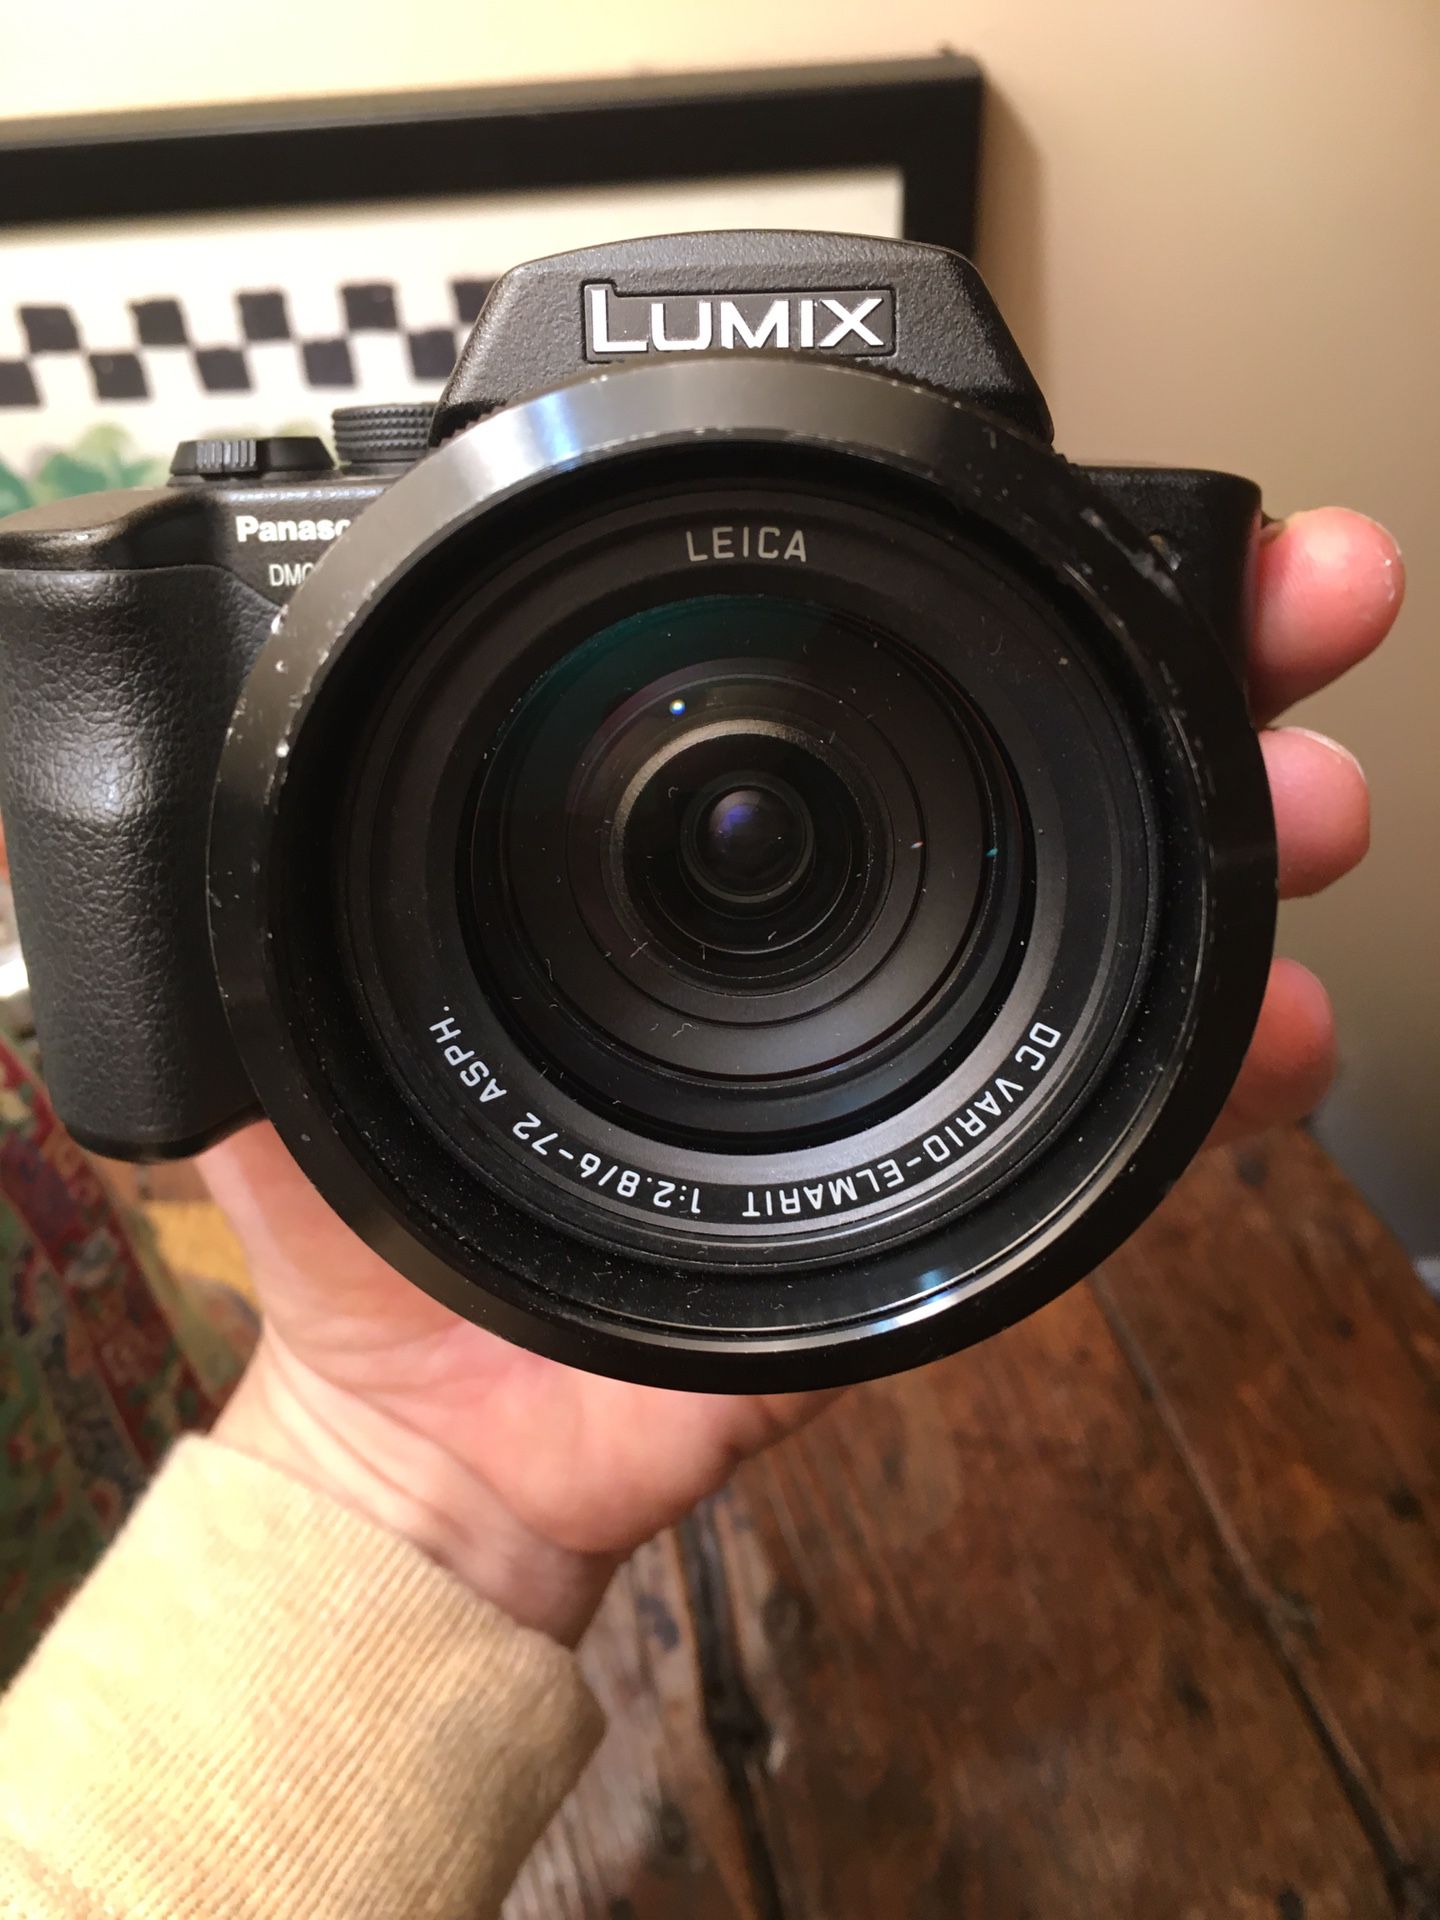 Panasonic LUMIX DMC-FZ20 5.0MP Digital Camera- Camera only- Accessories not included (battery charger/memory card)